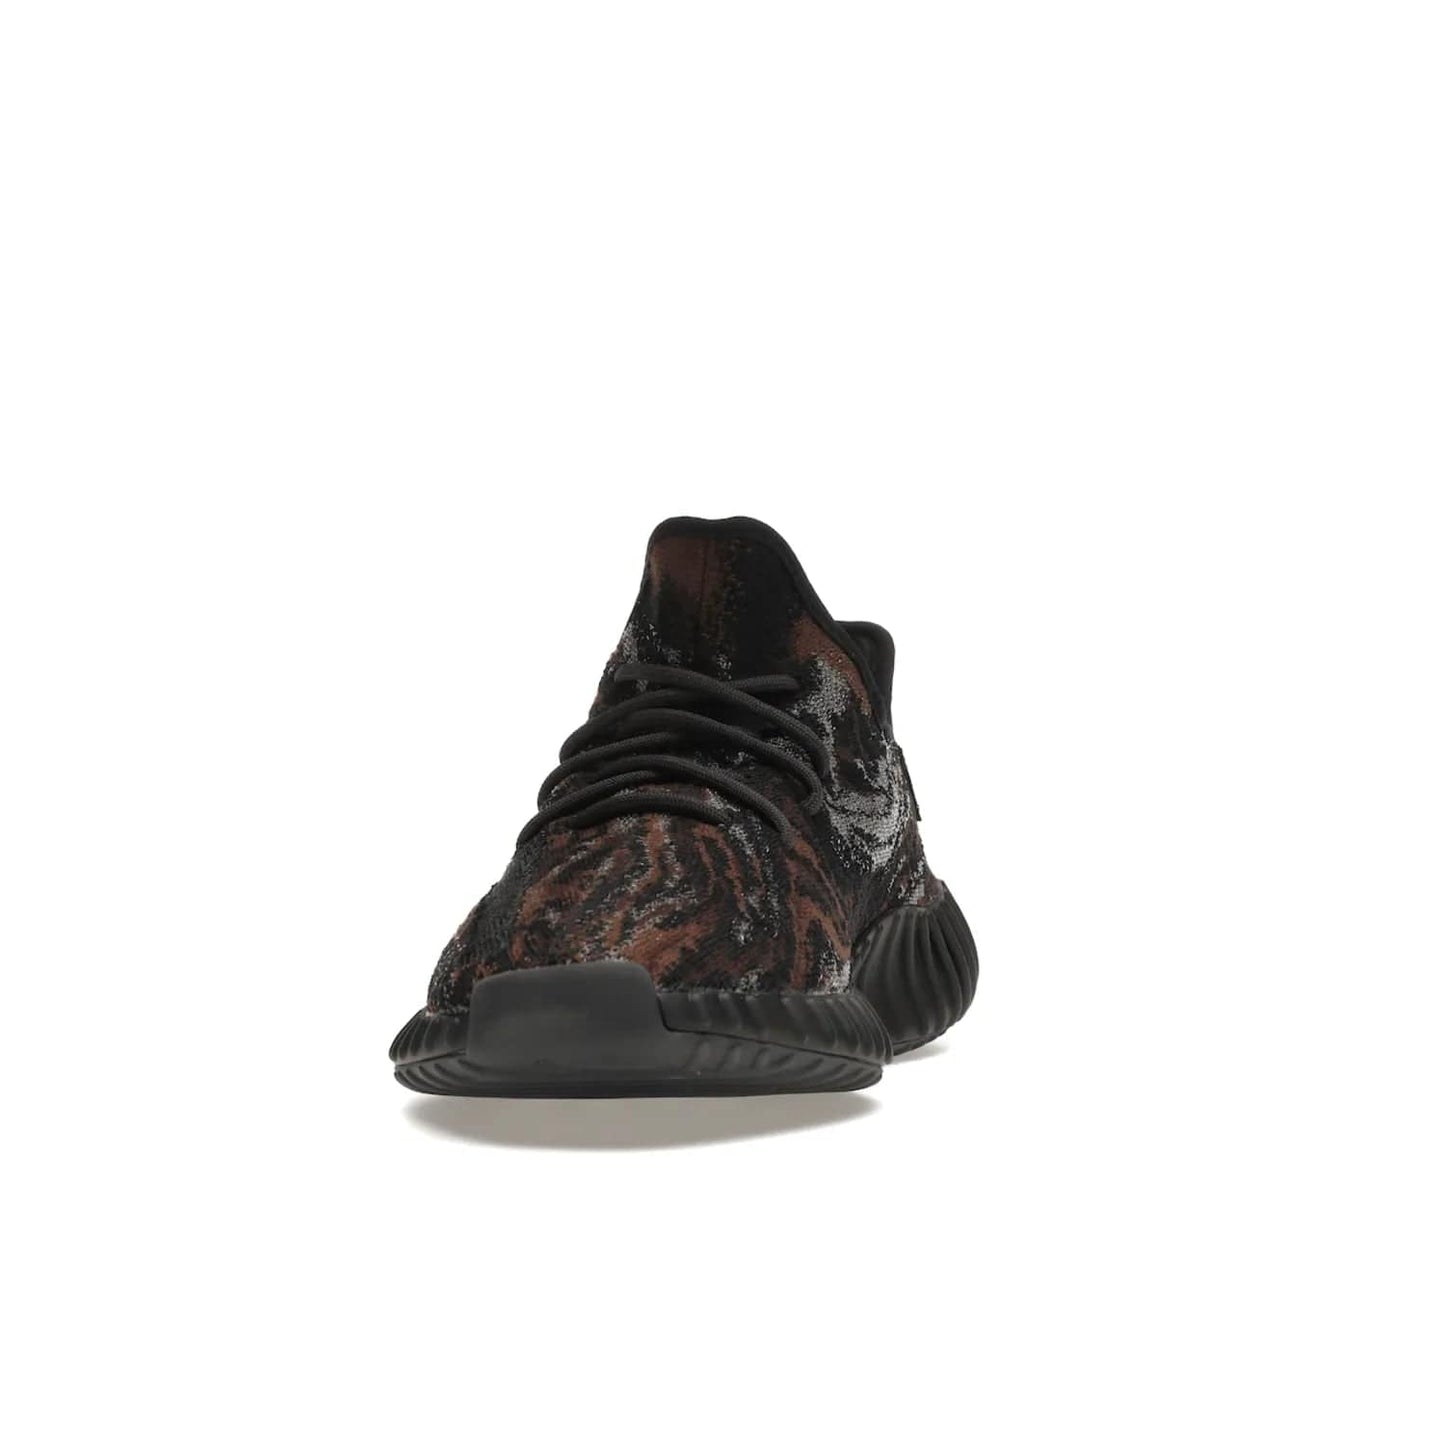 adidas Yeezy Boost 350 V2 MX Rock - Image 12 - Only at www.BallersClubKickz.com - The adidas Yeezy Boost 350 V2 MX Rock features a stylish marbled upper of black, grey, and brown tones. Shop the signature Boost sole, heel tab, and mesh side stripe now, available December of 2021.